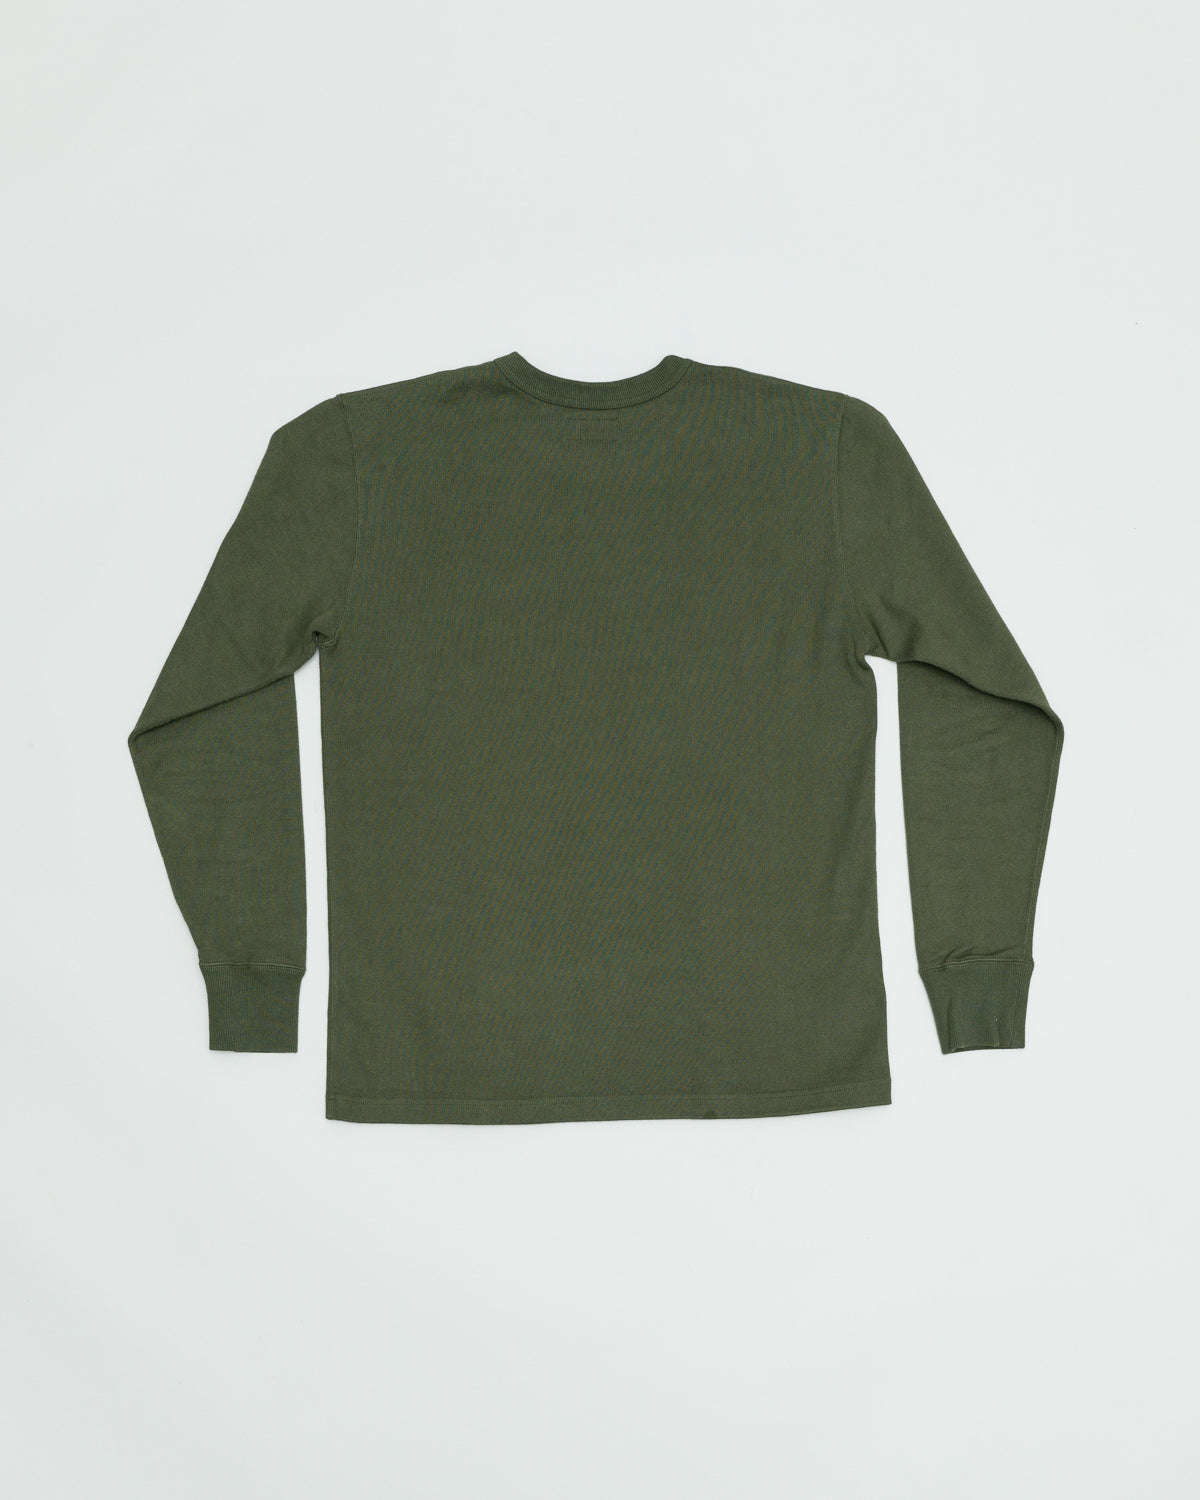 IHTL-1501-OLV - 11oz Cotton Knit Long Sleeved Crew Neck Sweater - Olive